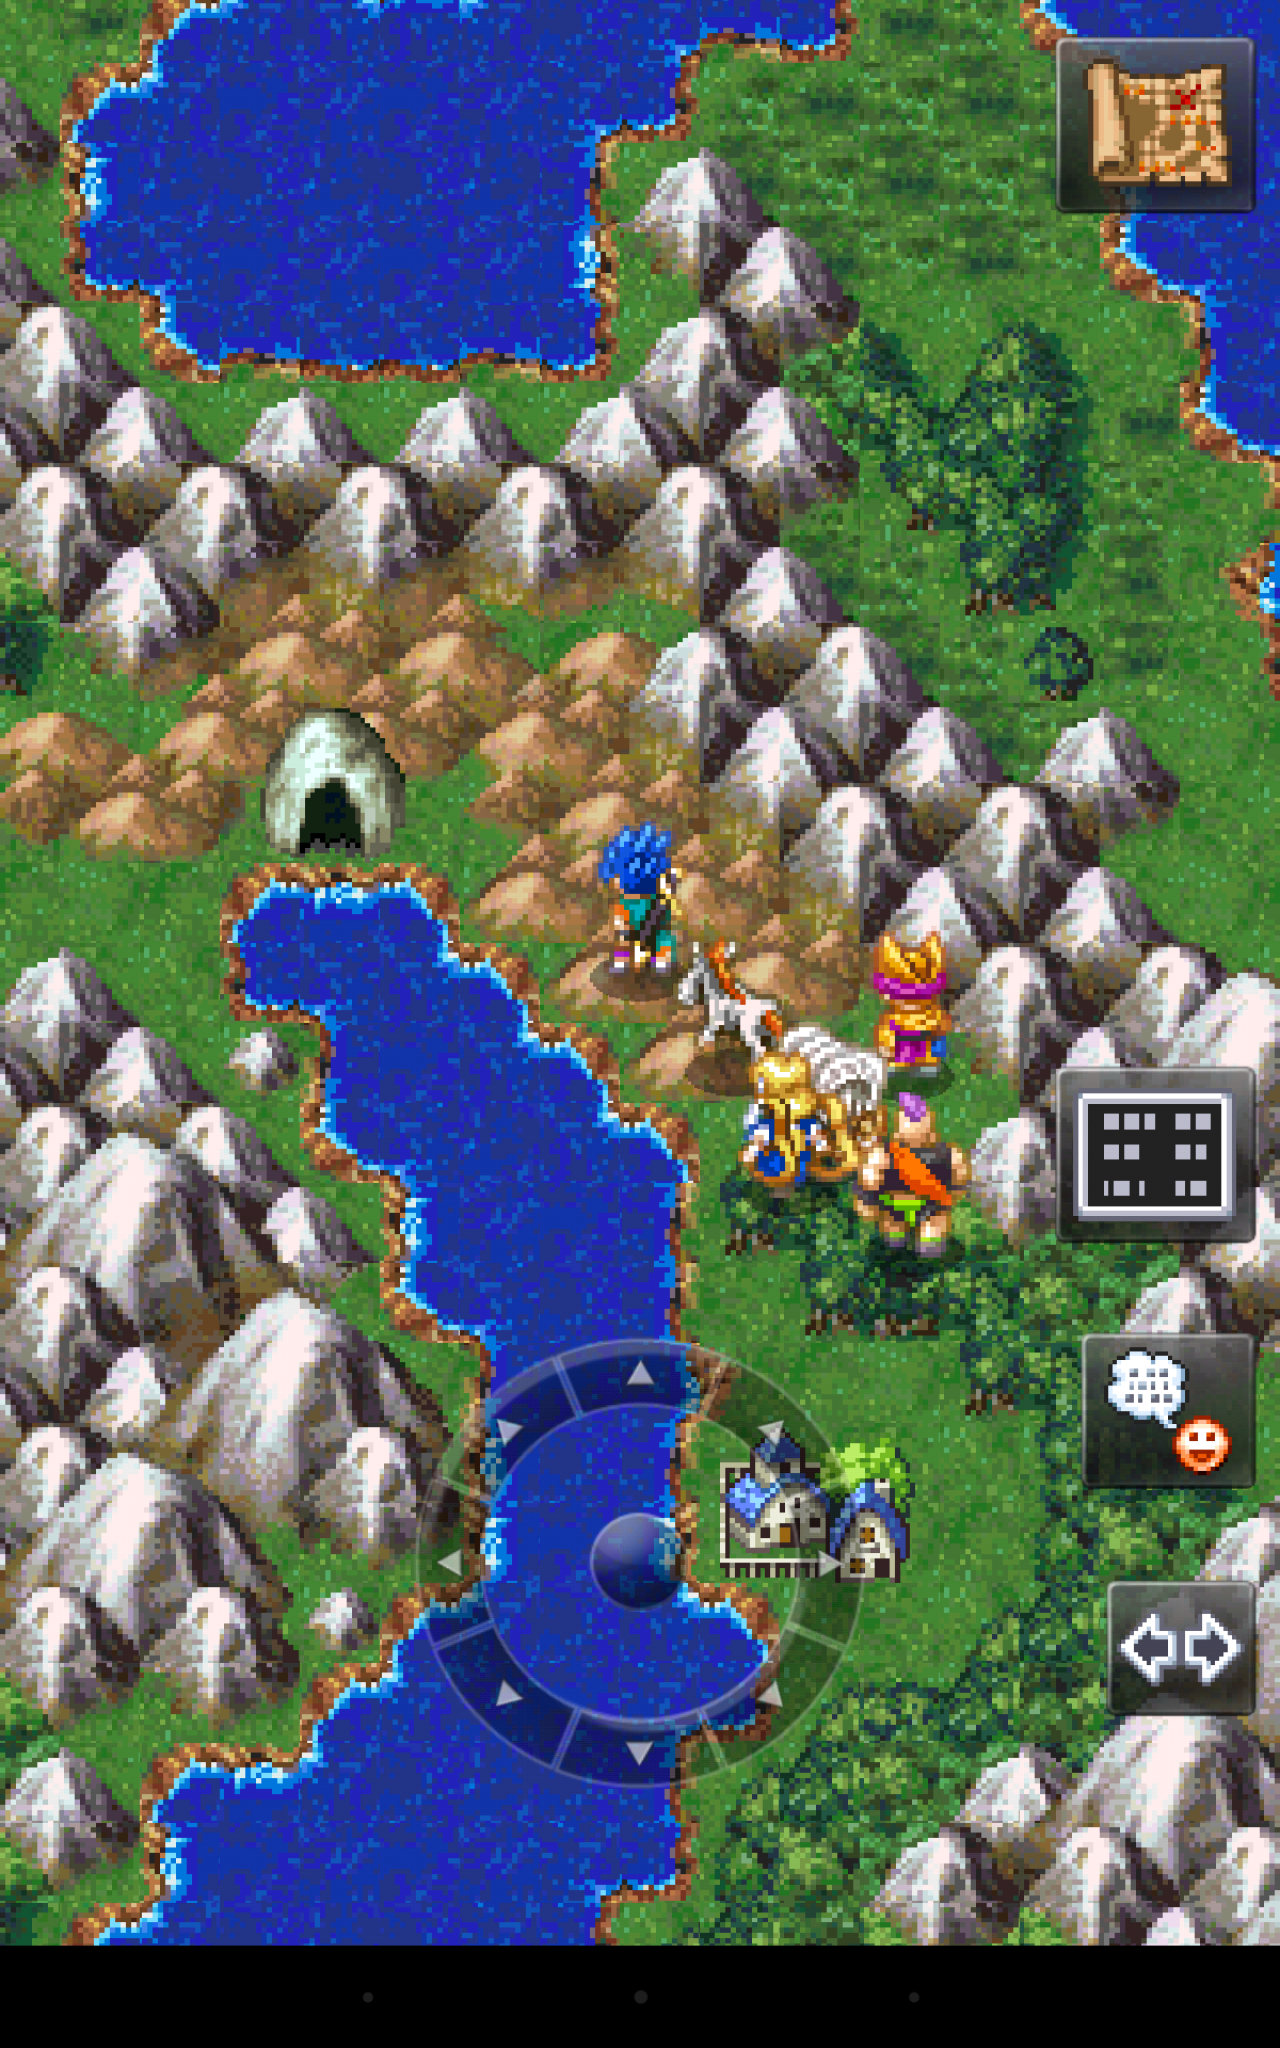 download dragon quest realms of reverie